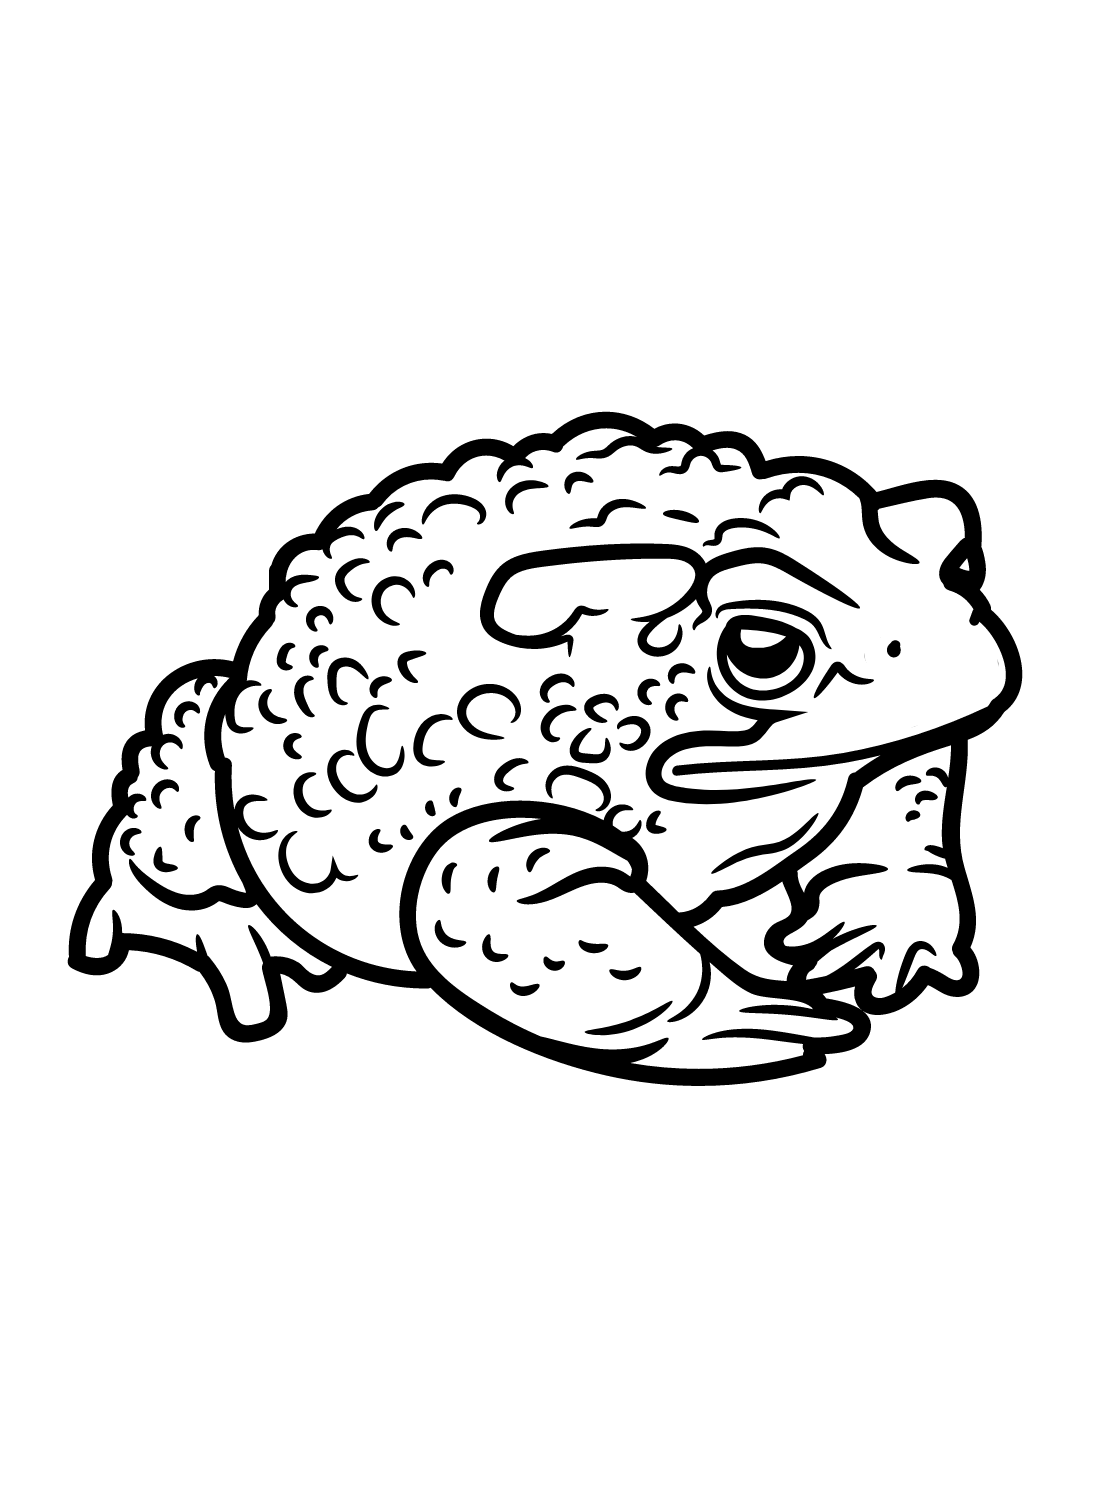 Toad to Print Coloring Page